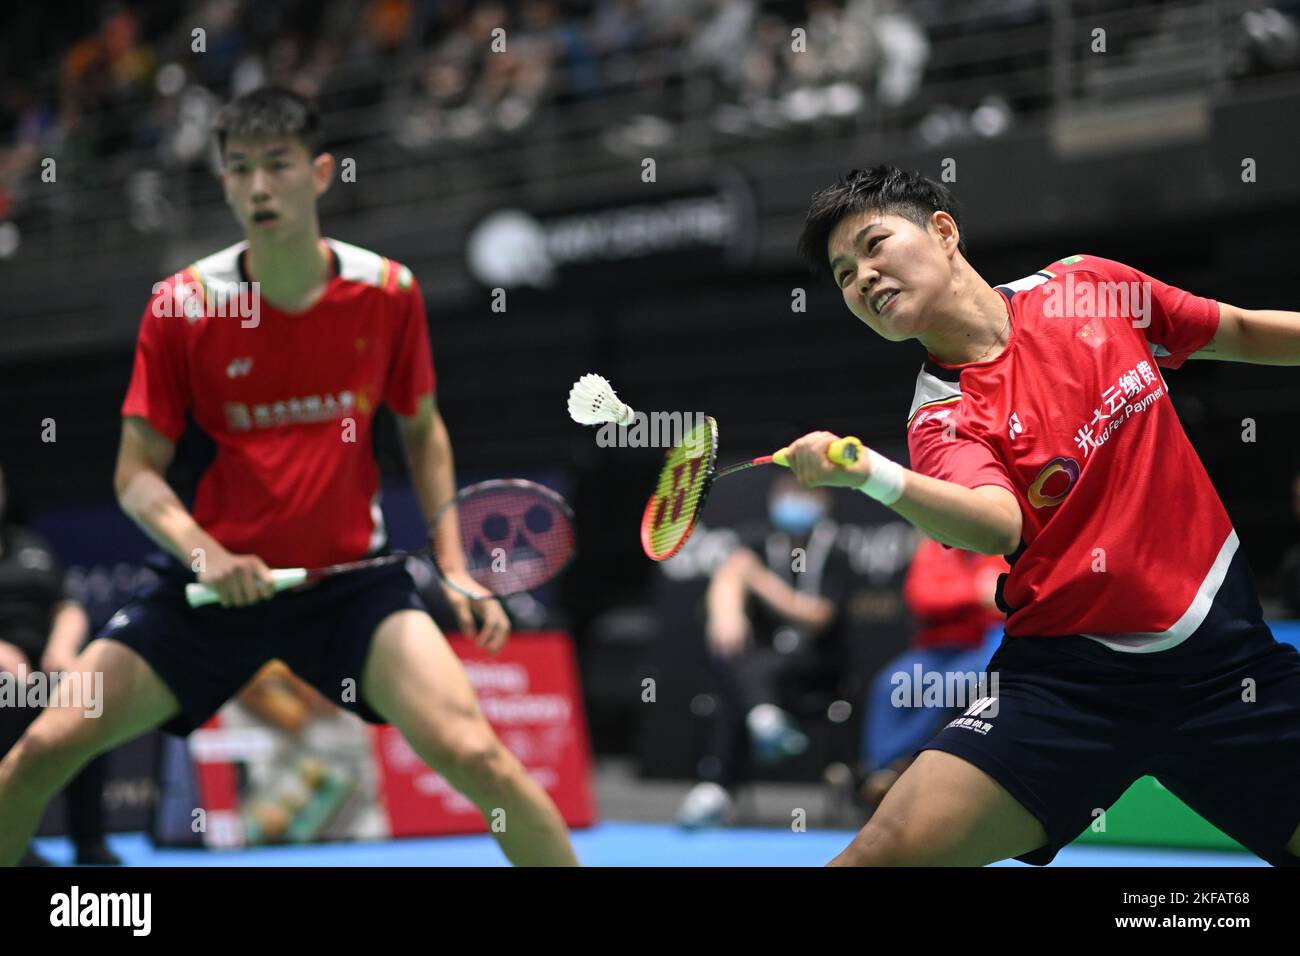 Sydney, Australia. 17th Nov, 2022. Feng Yan Zhe (L) and Huang Dong Ping (R) of China seen during the 2022 SATHIO GROUP Australian Badminton Open mixed double round of 16 match against Young Hyuk Kim and Lee Yu Lim of Korea. Feng and Huang won the match 12-21, 21-14, 21-15. Credit: SOPA Images Limited/Alamy Live News Stock Photo